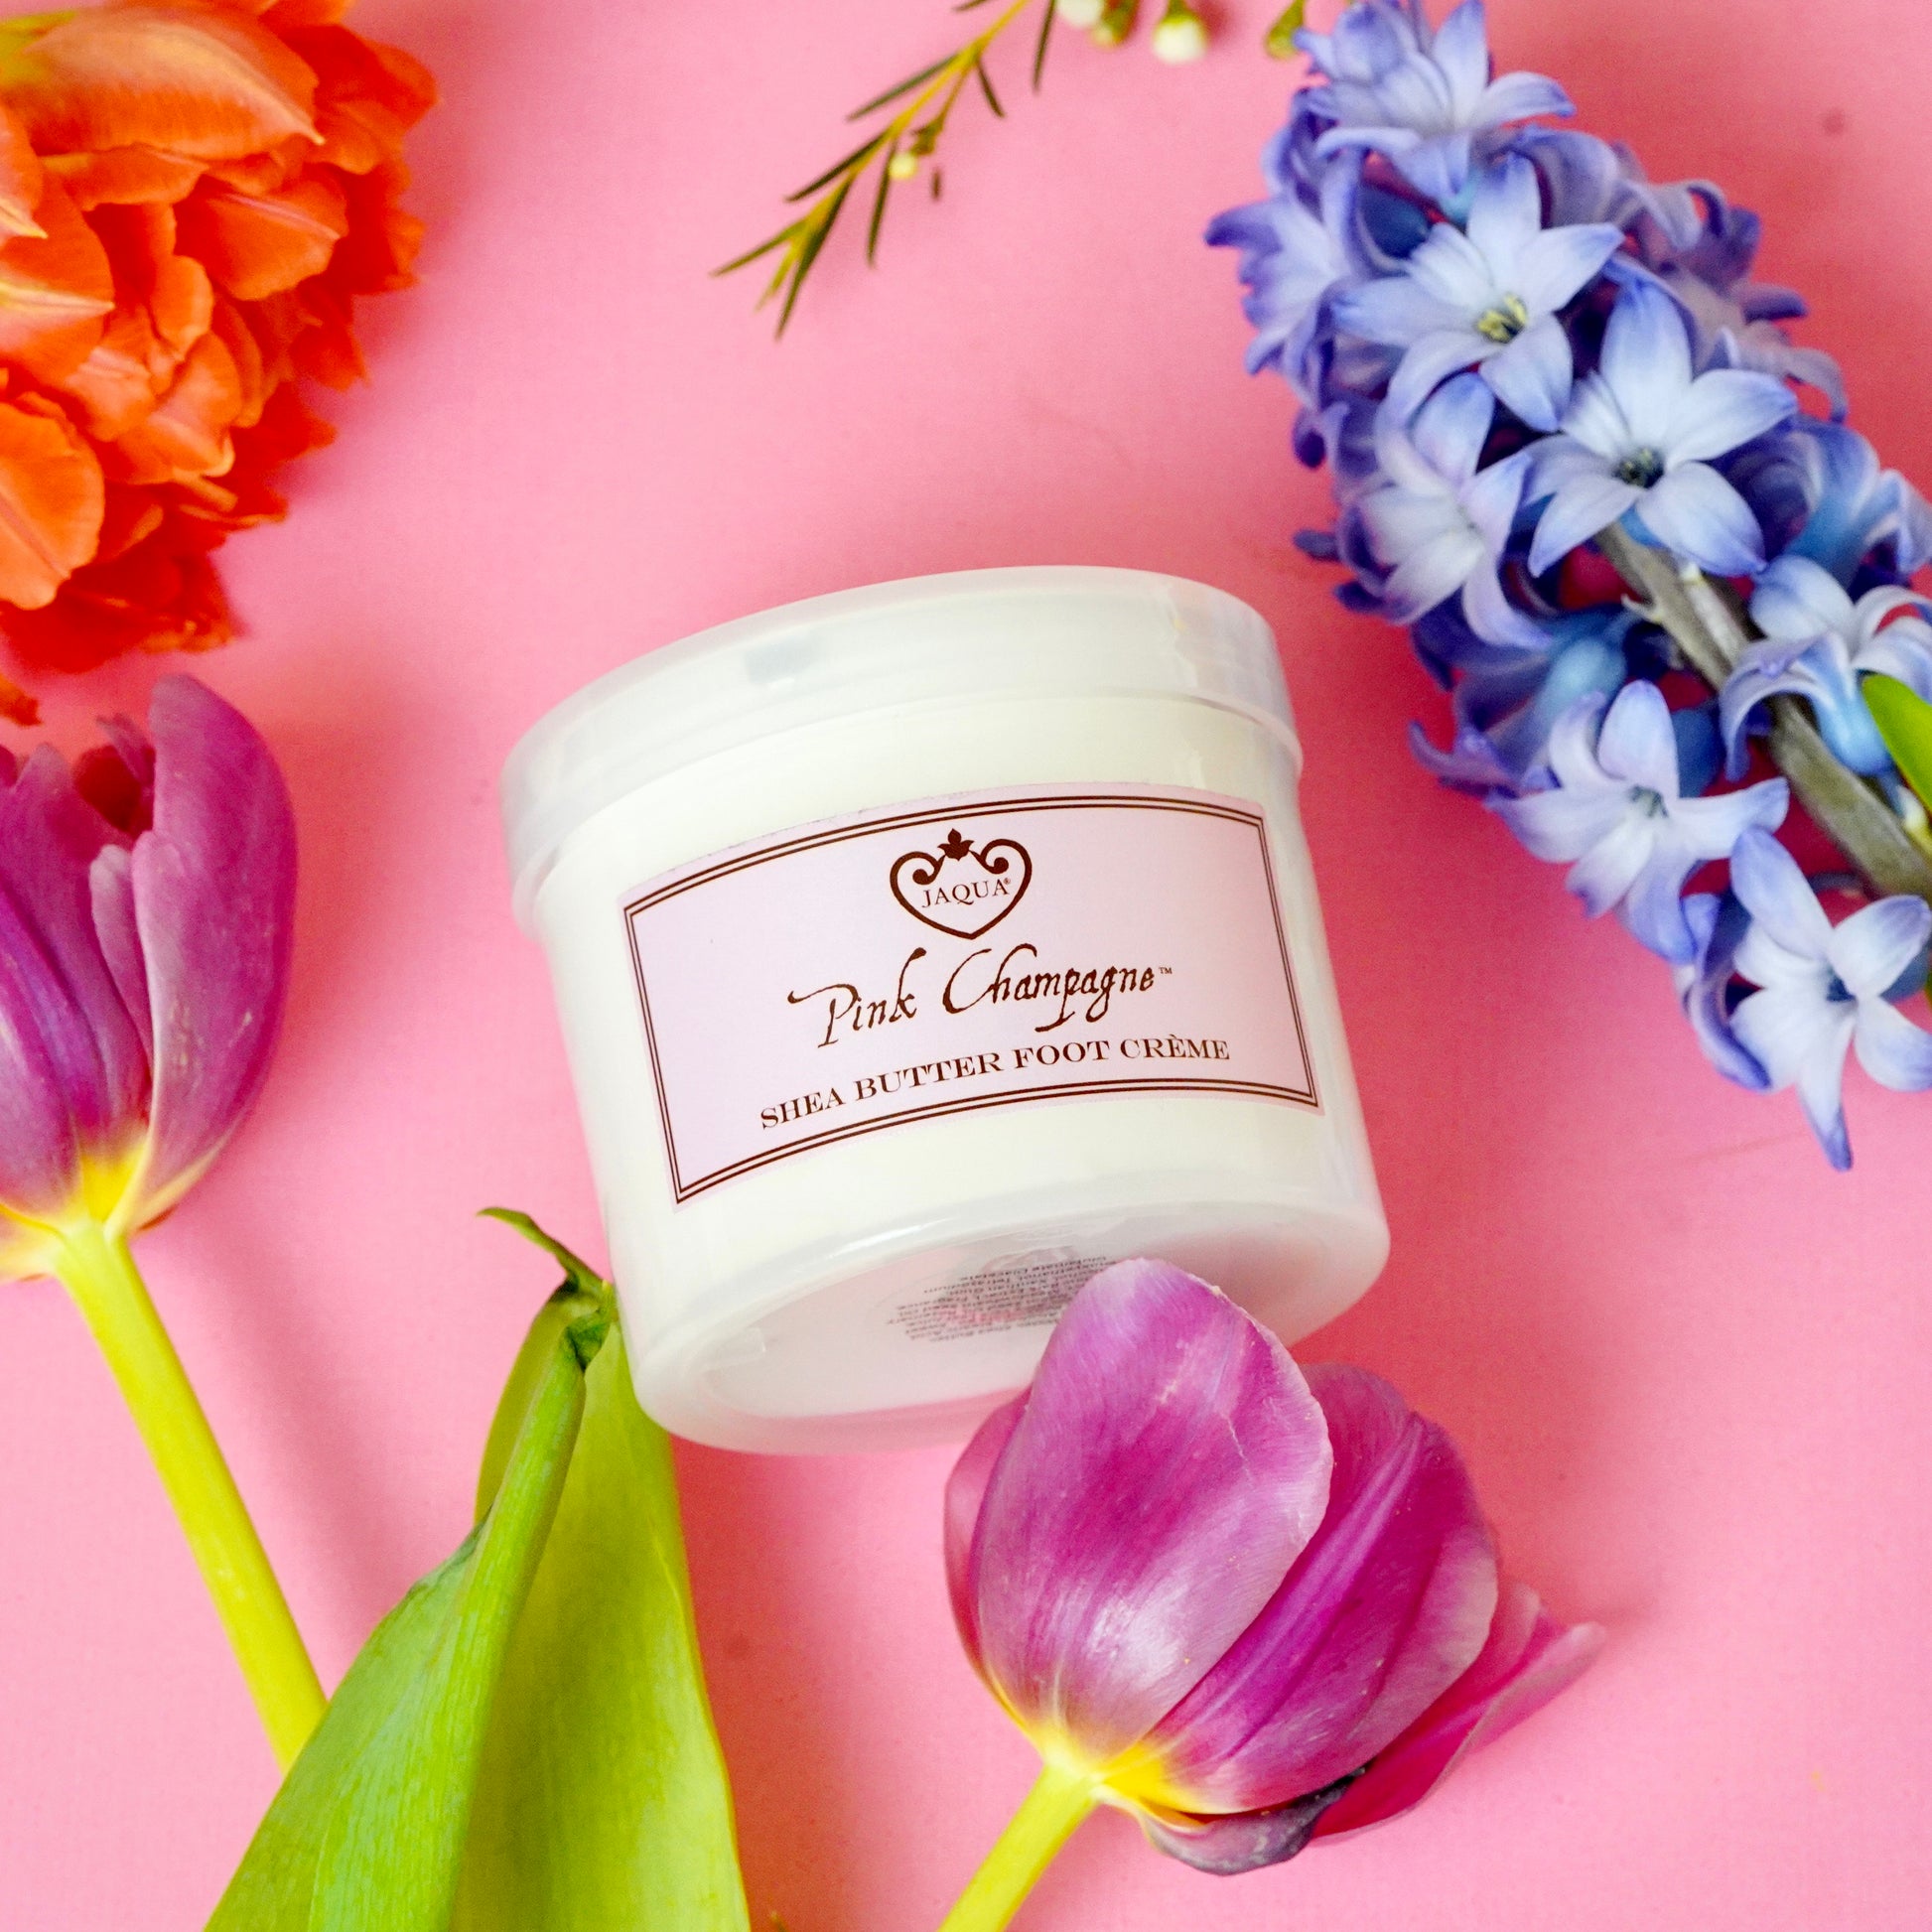 Floral Foot Creme with Shea Pink Champagne